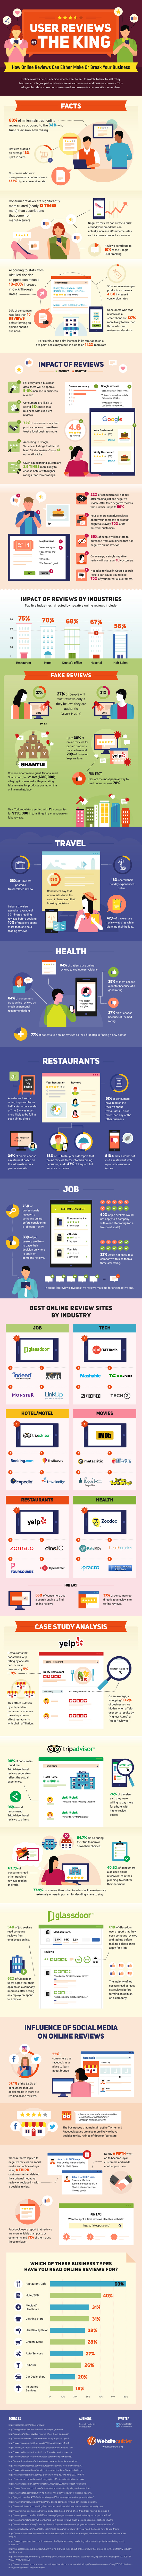 Why Online Reviews Can Either Make Or Break Your Business!